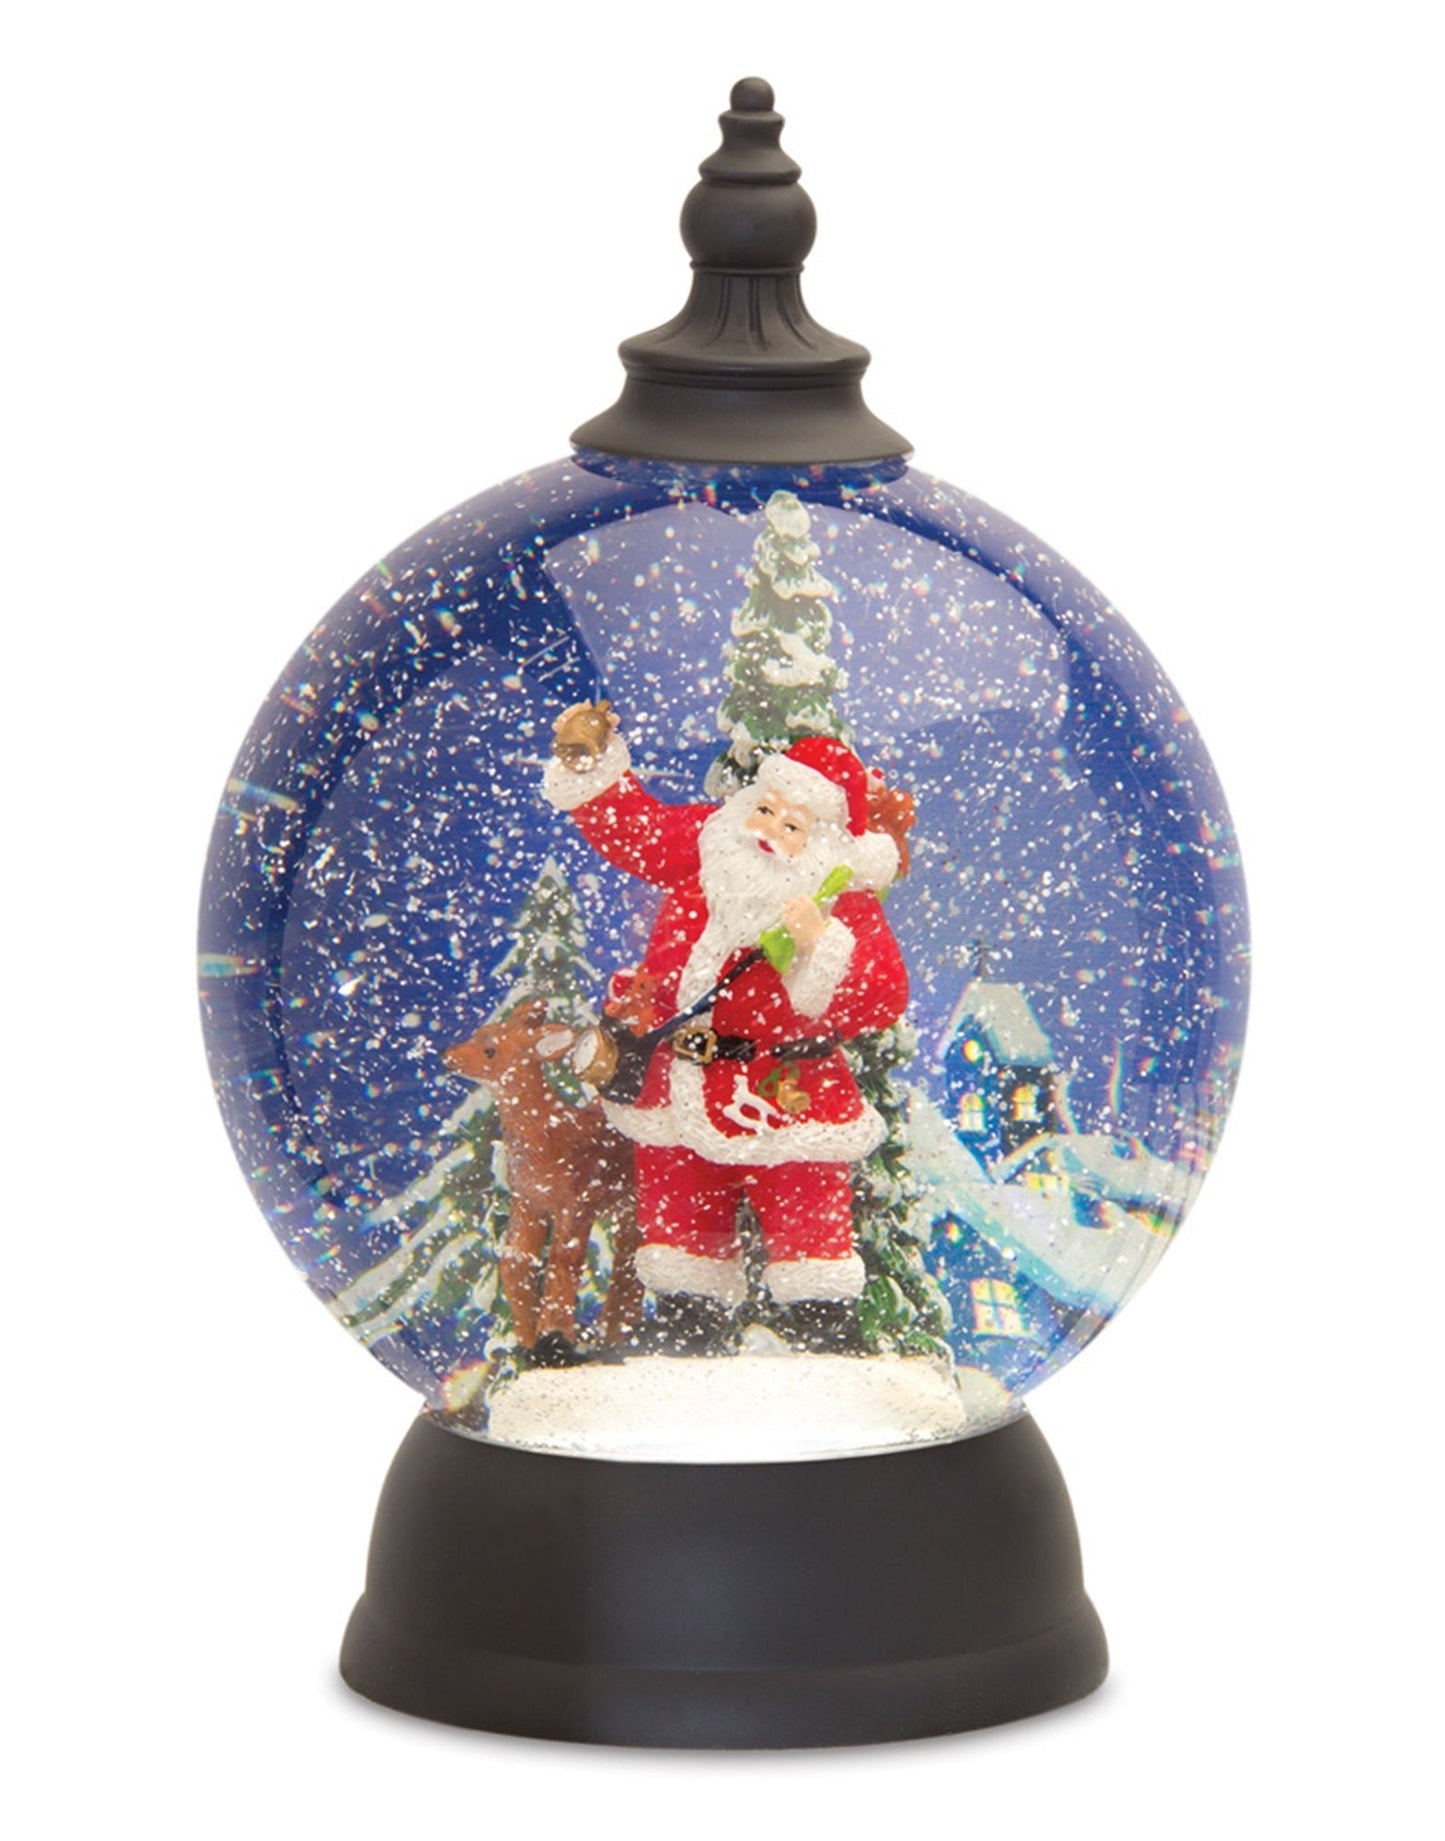 LED Snow Globe Ball with Santa and Deer Figure 9.25"D